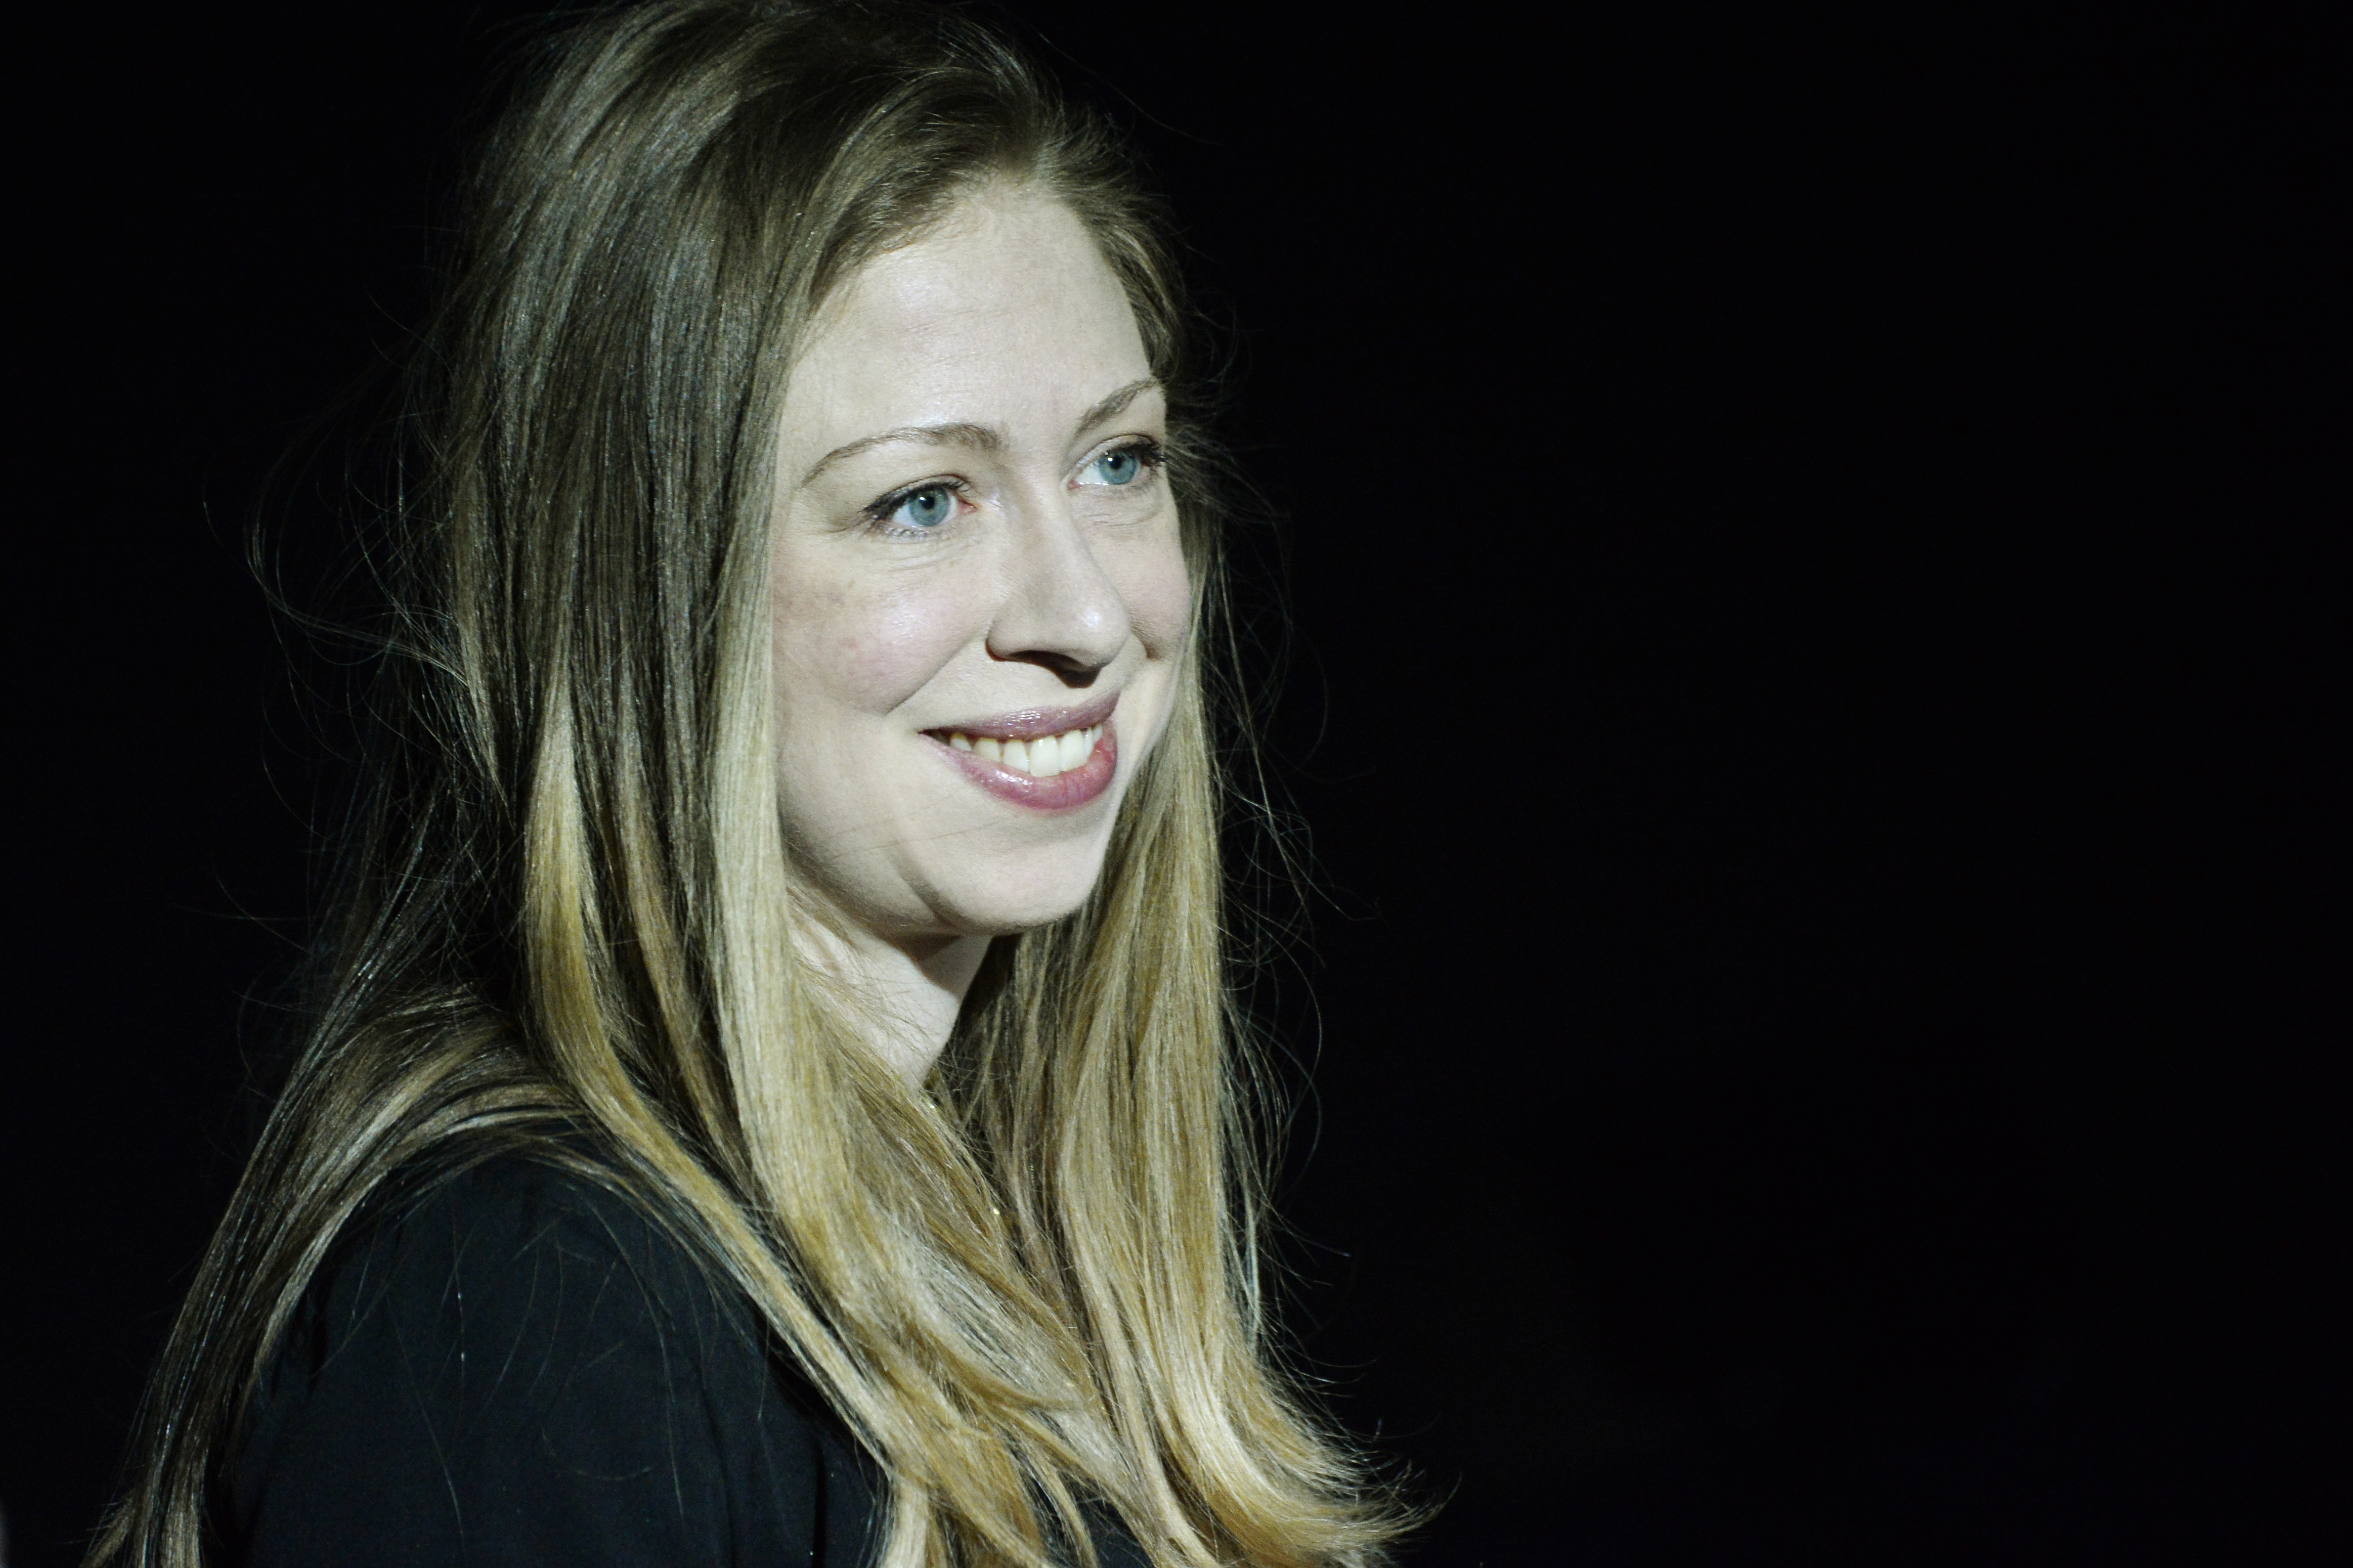 Chelsea Clinton host from STEM to success: A No Ceilings Conversation at the Denver Museum of Nature and Science Planetarium, June 23, 2014. T (RJ Sangosti&mdash;Denver Post via Getty Images)